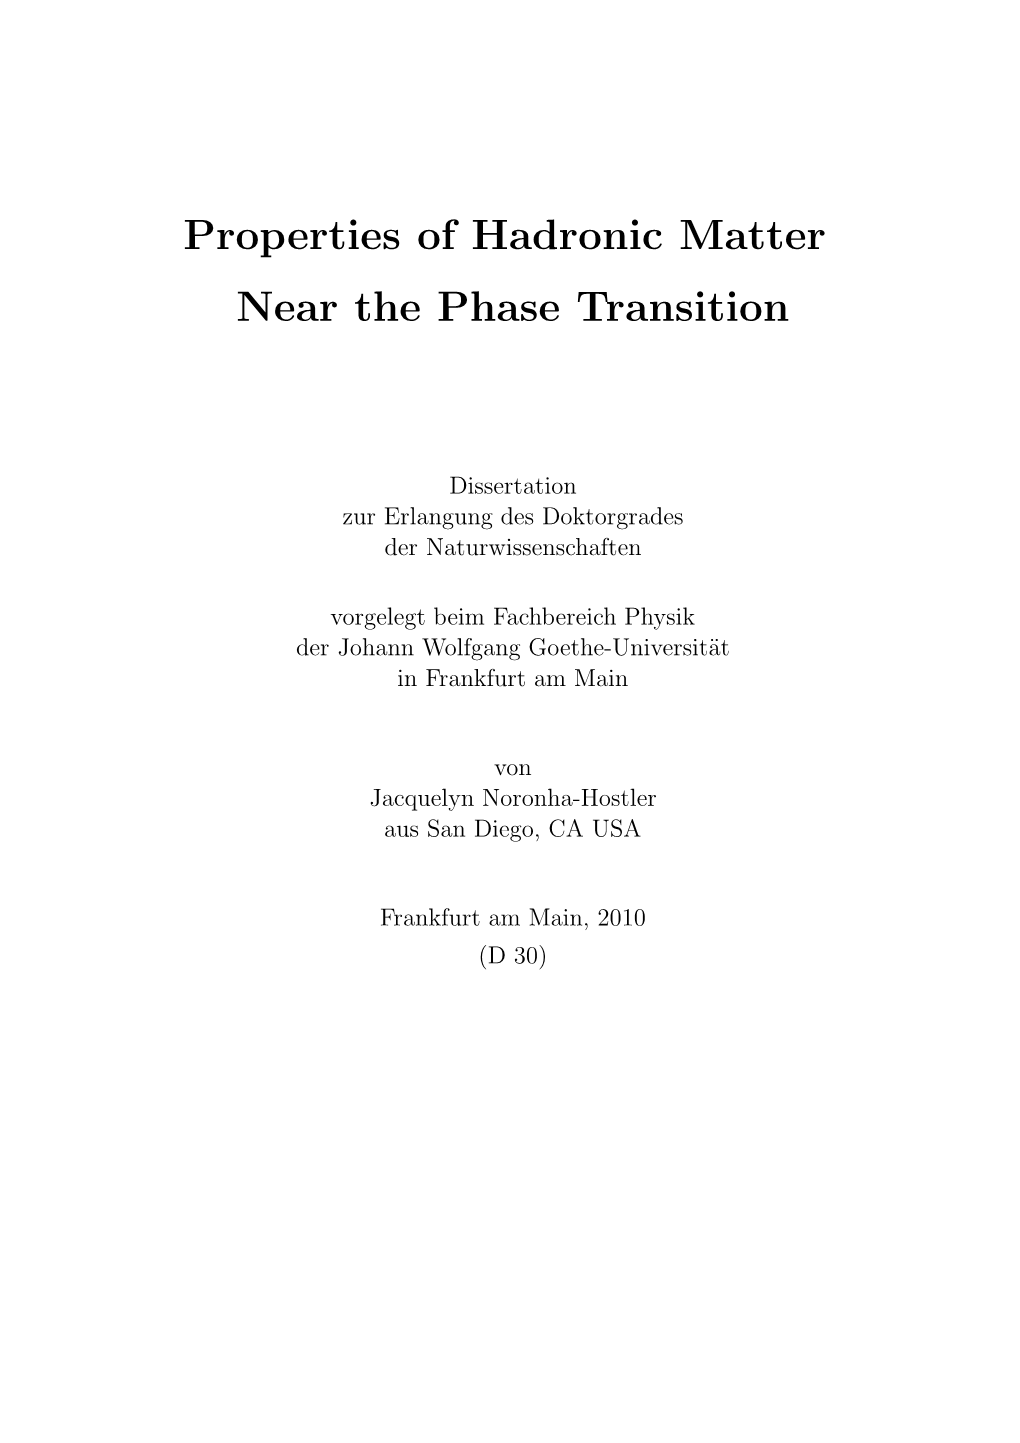 Properties of Hadronic Matter Near the Phase Transition